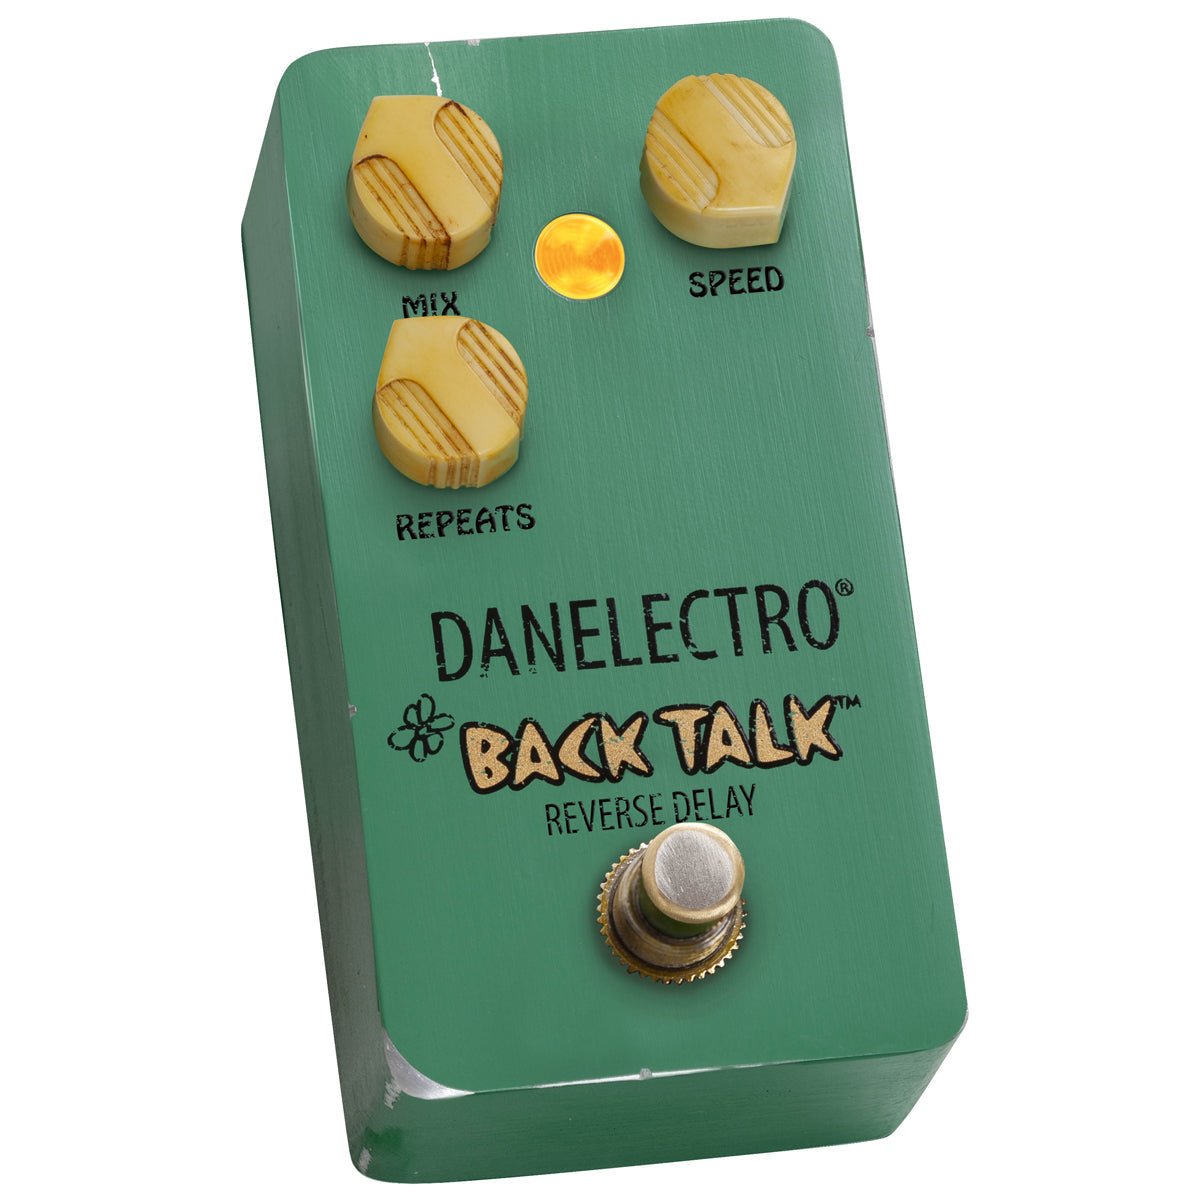 Danelectro Back Talk Reverse Delay Pedal, Effect Pedals for sale at Richards Guitars.